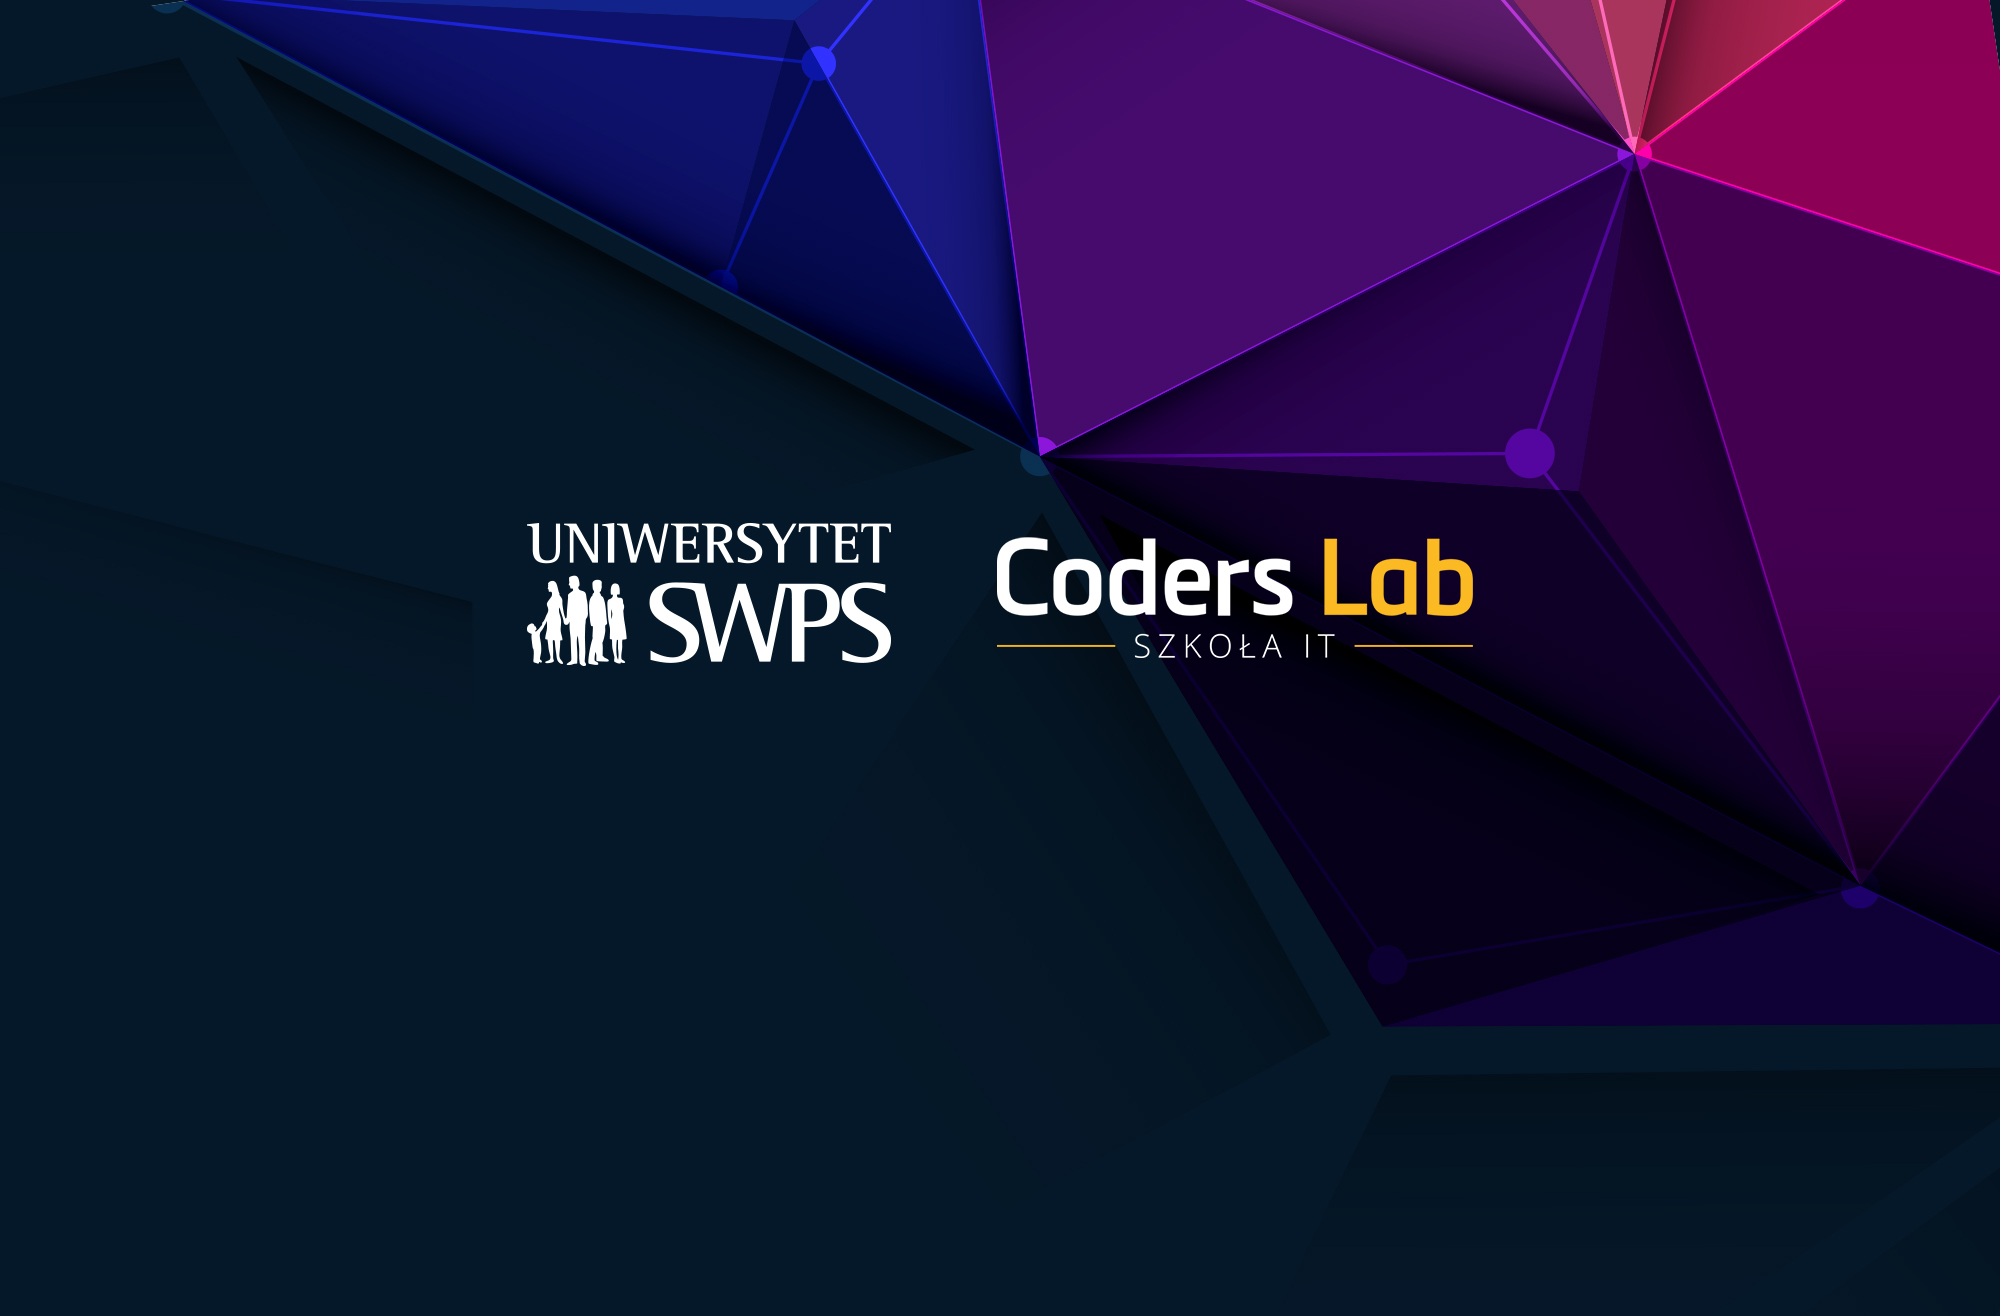 SWPS University Signs Cooperation Agreement with Coders Lab